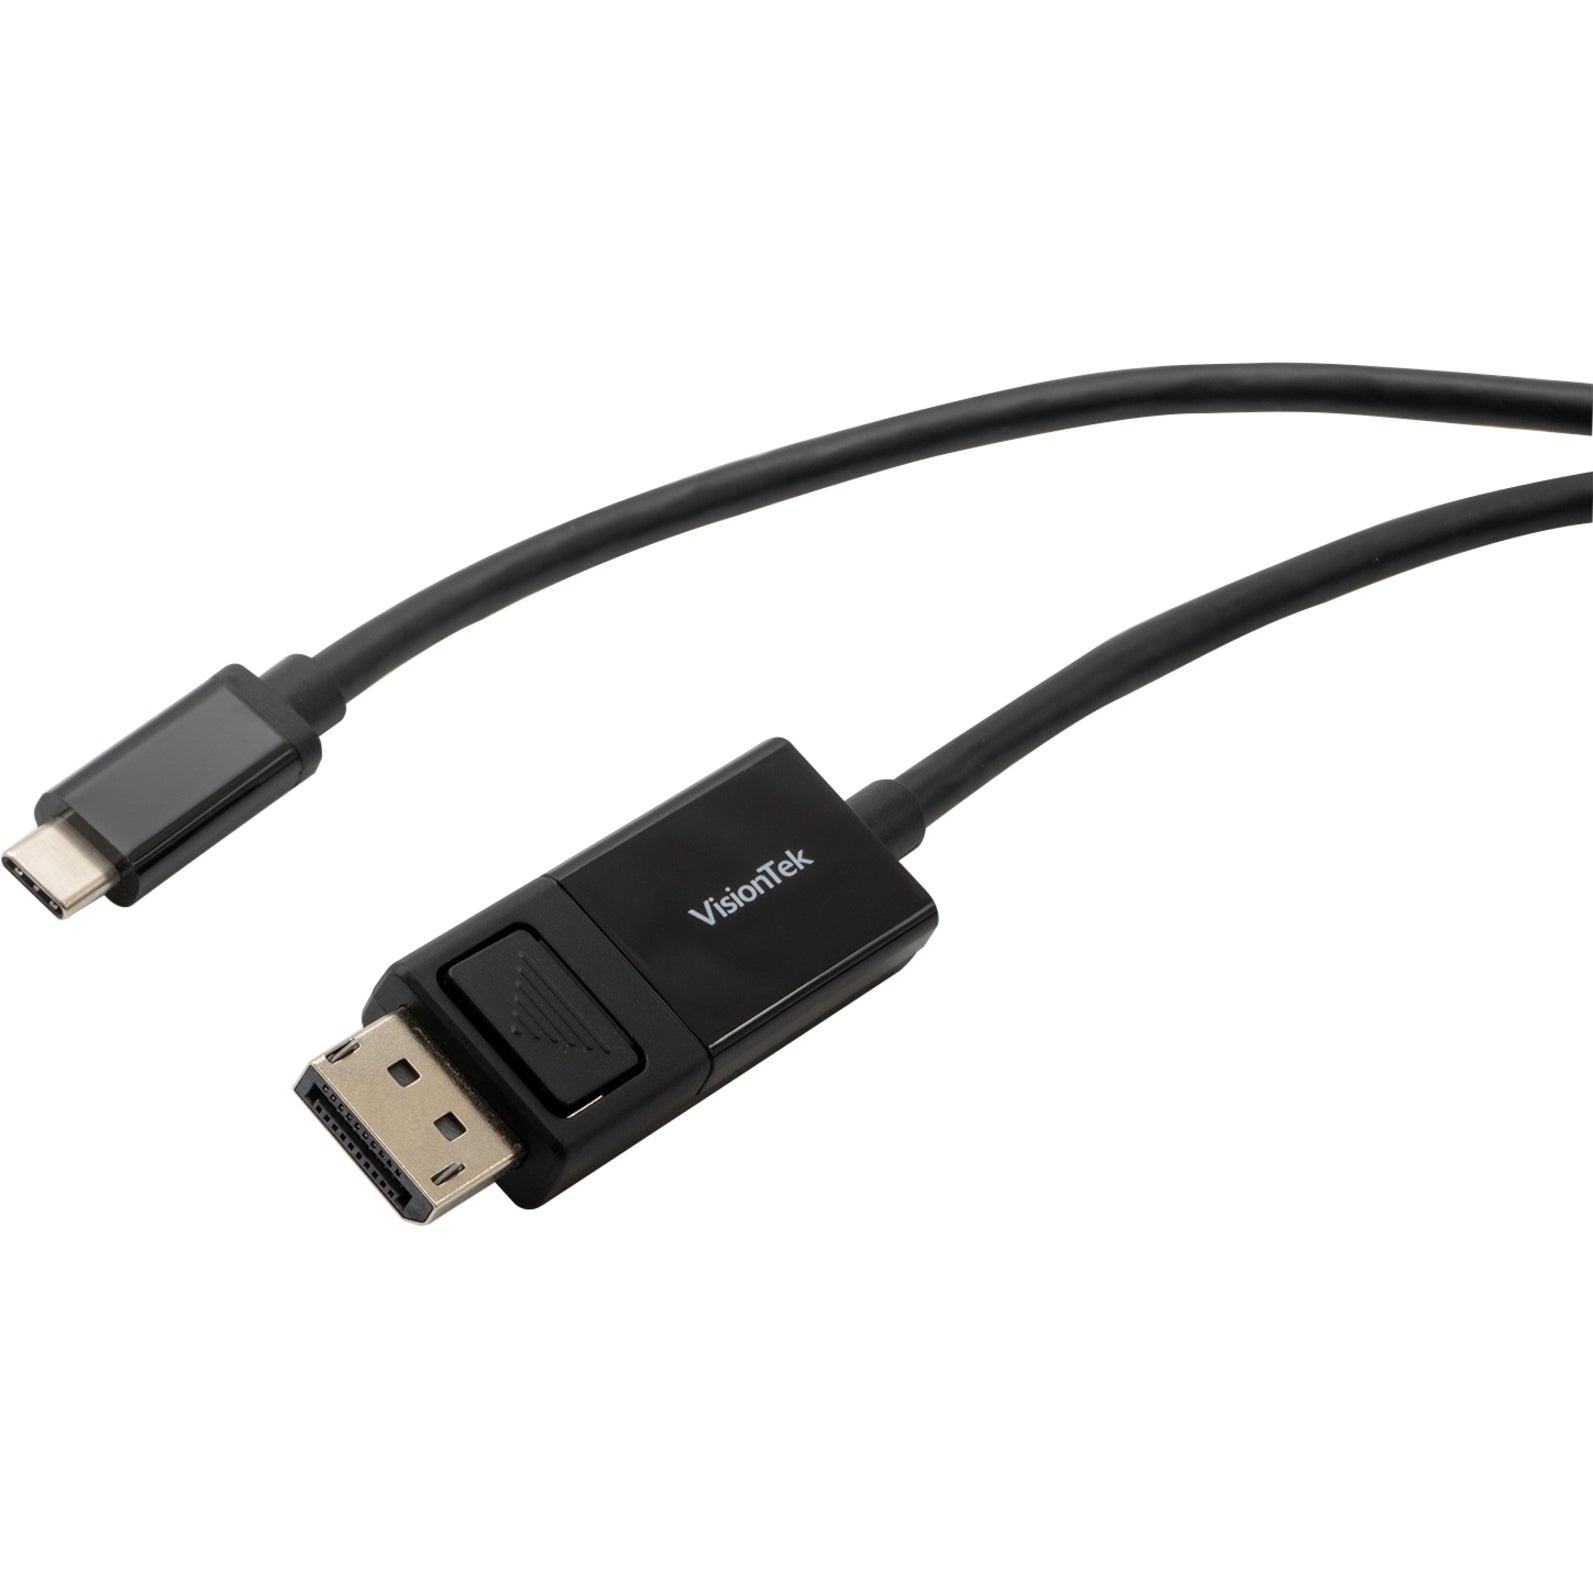 VisionTek 901288 USB-C to DisplayPort 1.4 Bi-Directional 2M Active Cable (M/M), Plug & Play, 3840 x 2160 Supported Resolution